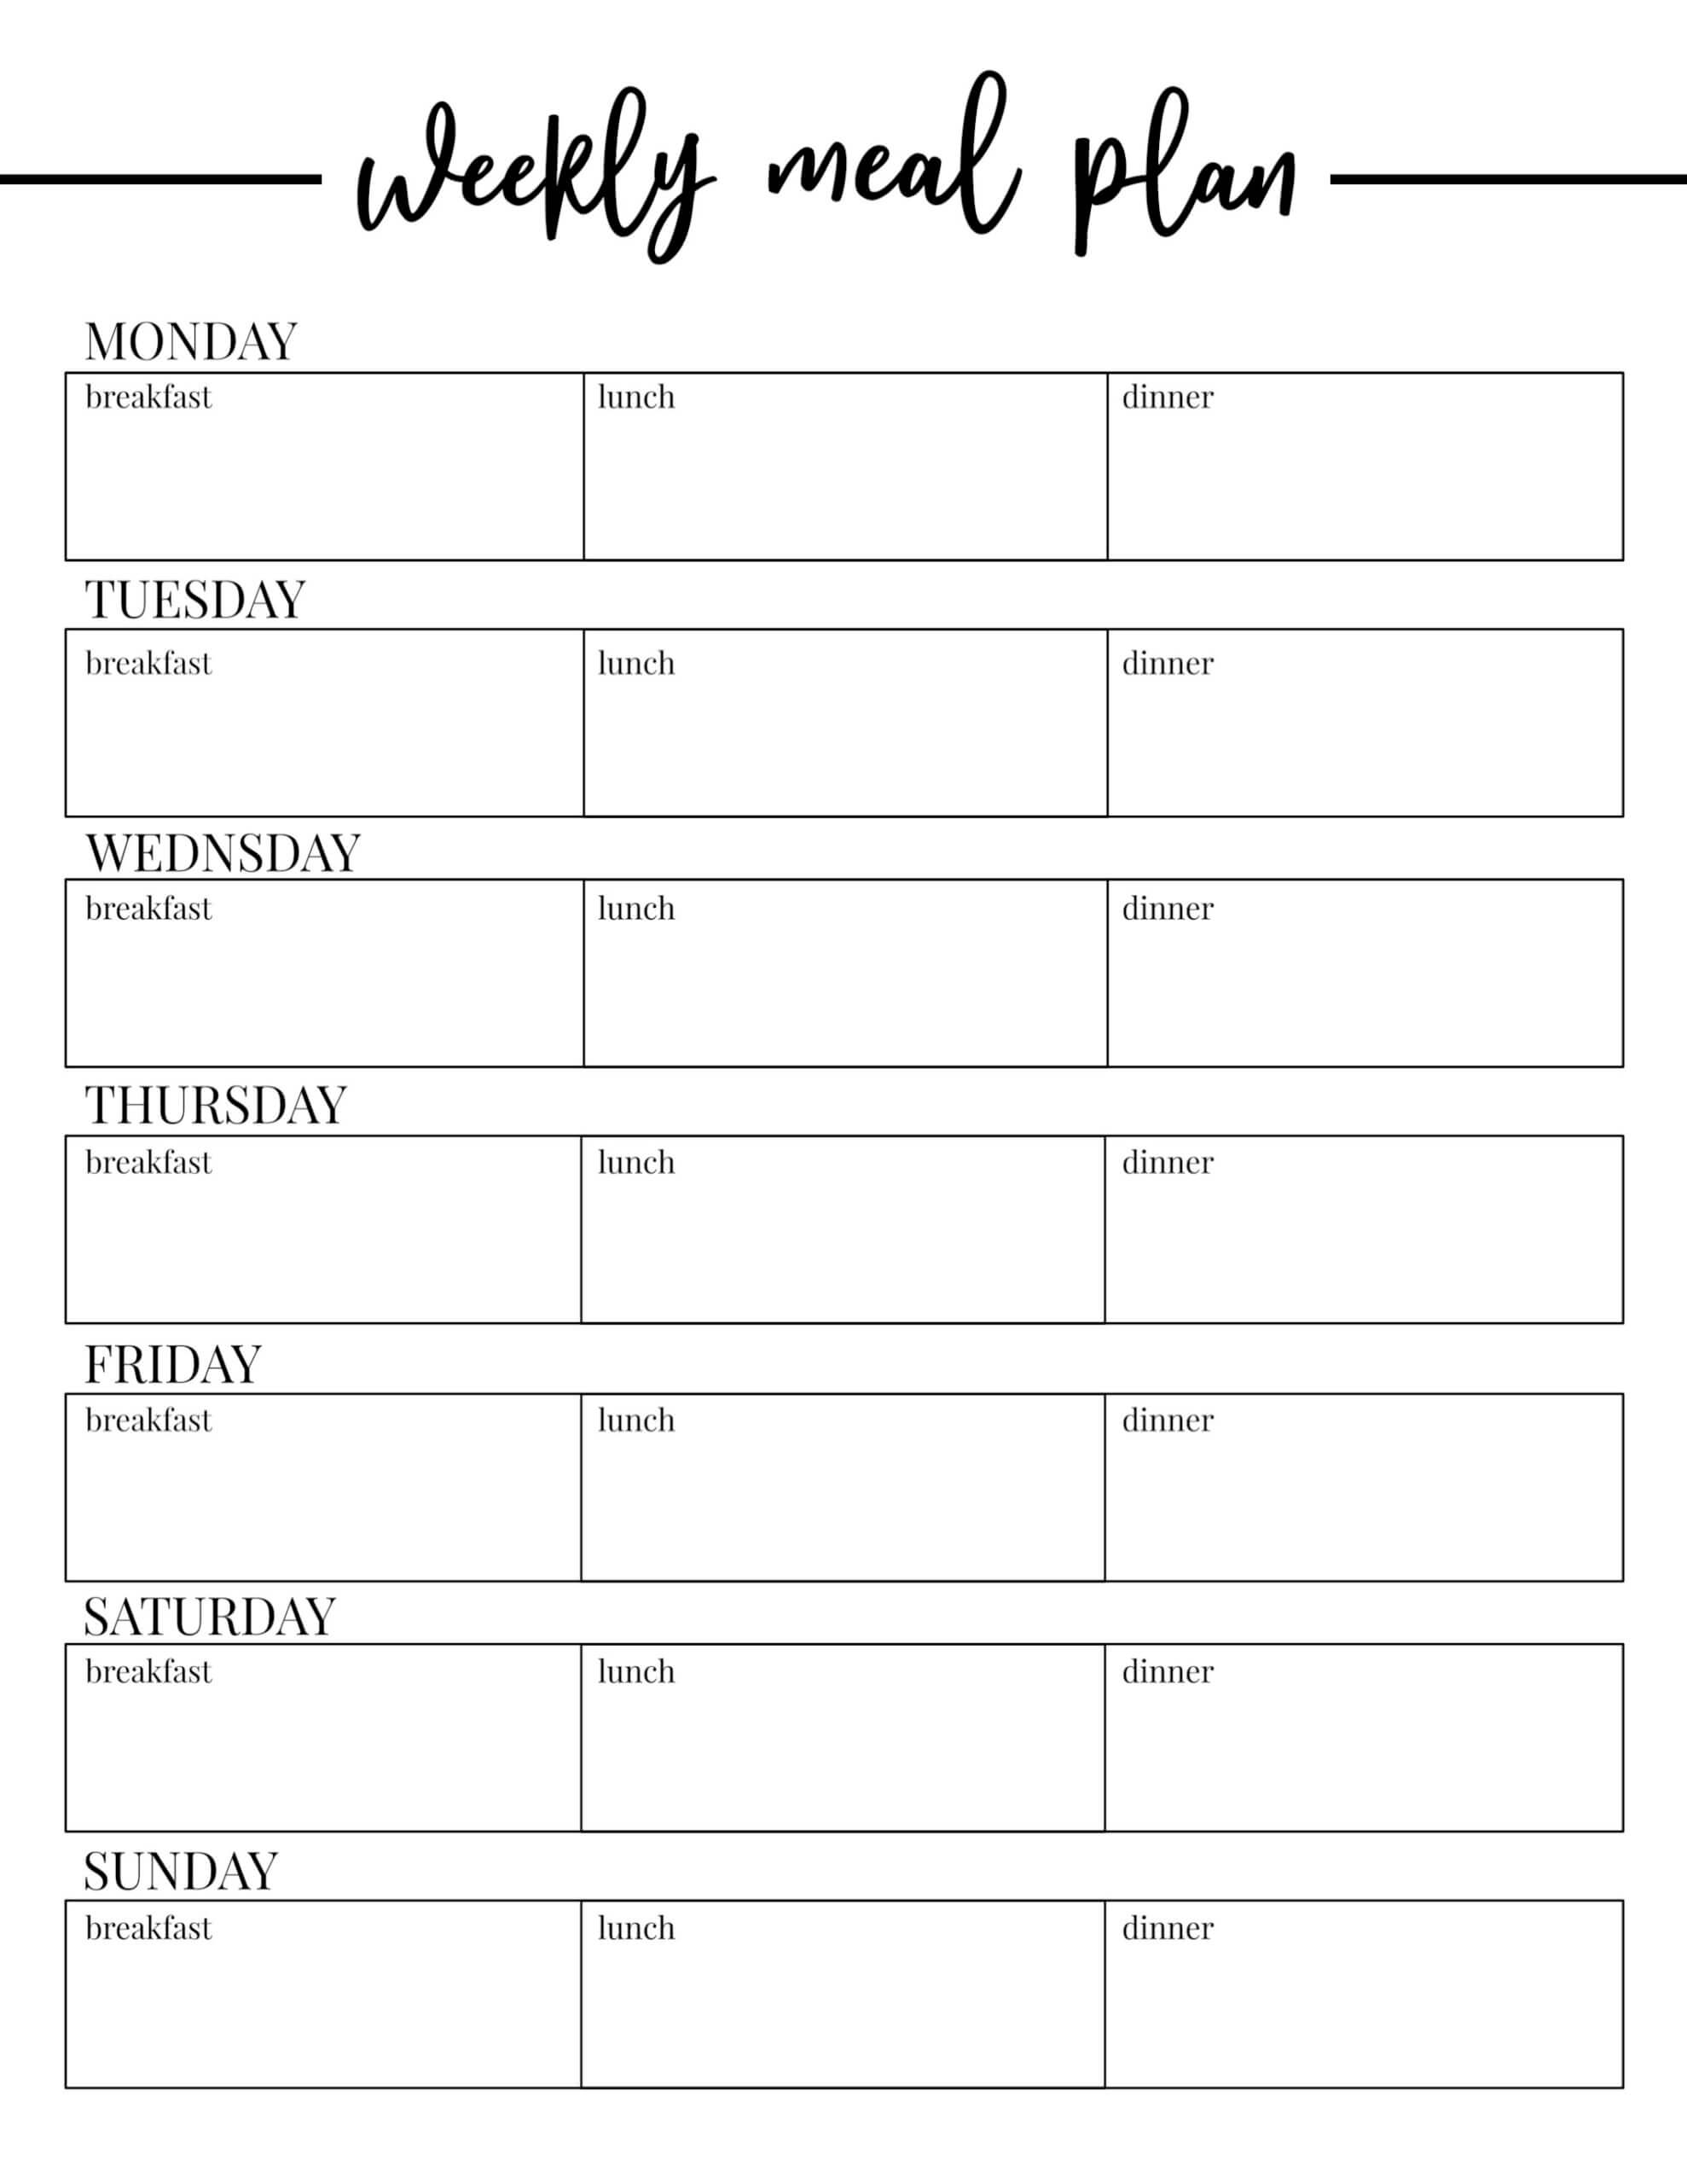 010-template-ideas-meal-plan-pdf-frightening-weekly-planning-with-blank-meal-plan-template